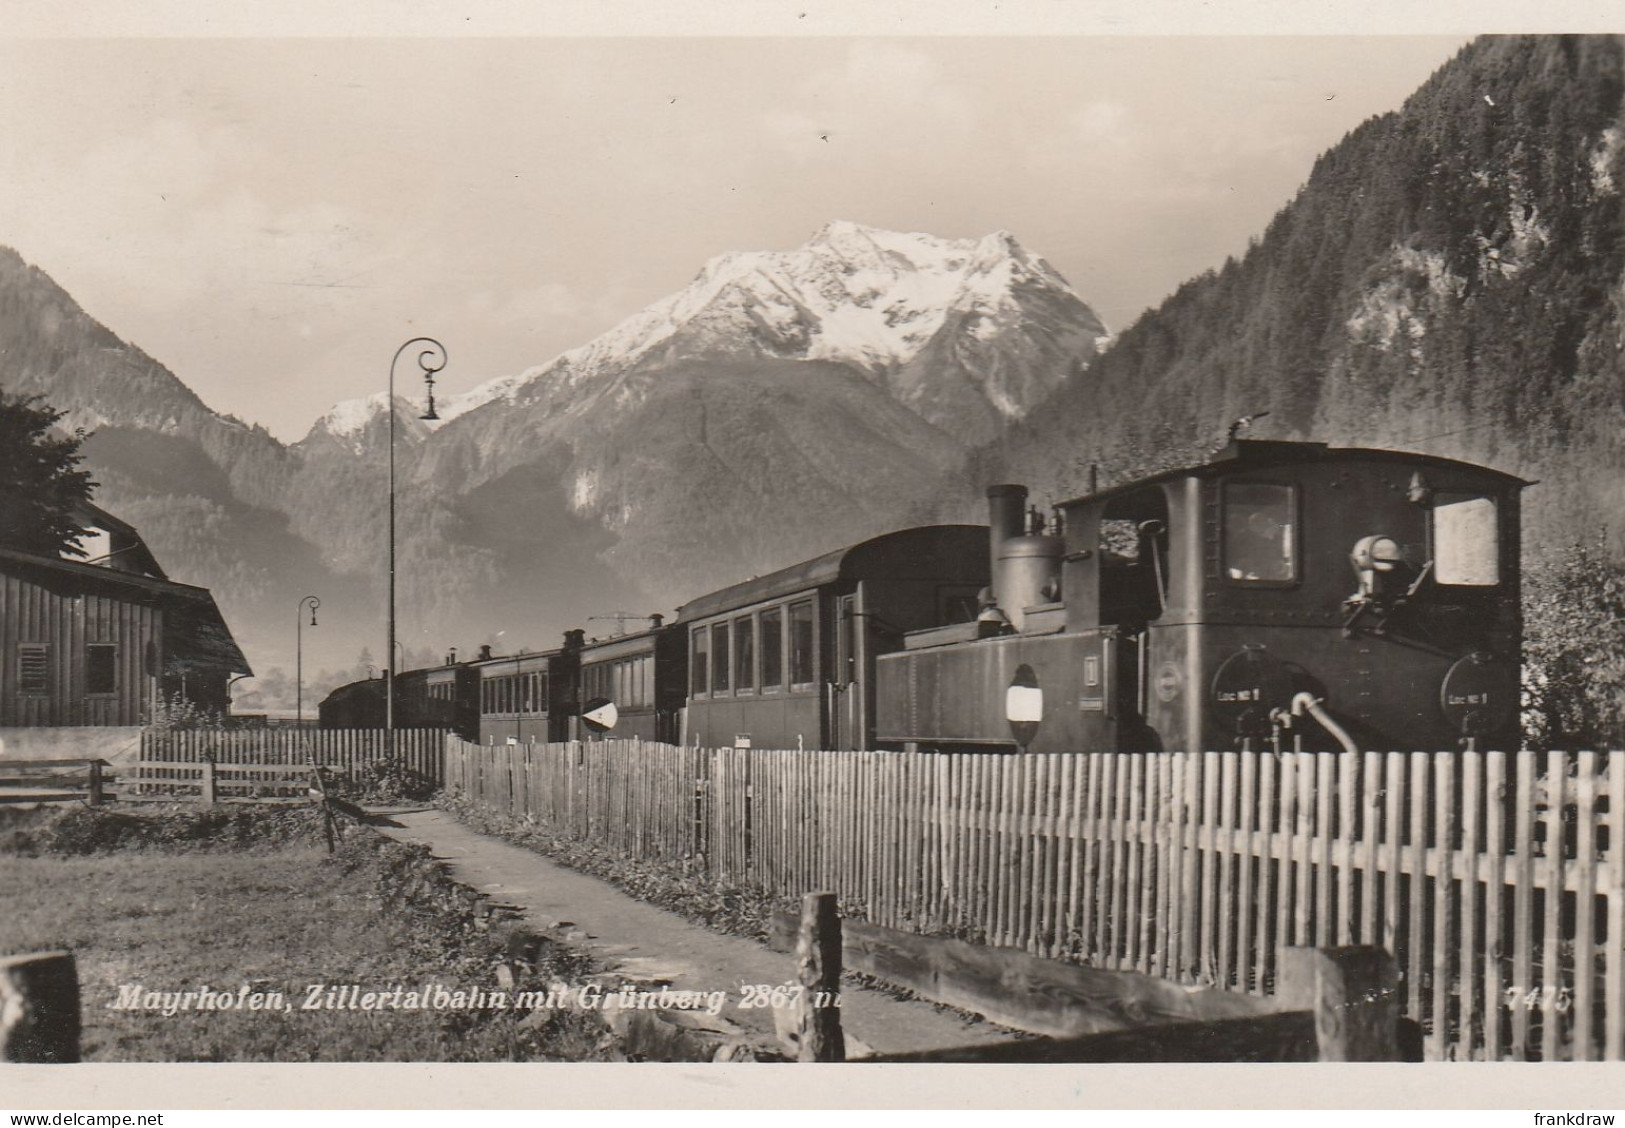 Postcard - Mayrhofen, Zillertaalbahn Mit Grunberg -card No.2867 - Posted But Stamp And Date Stamp Removed Very Good - Unclassified